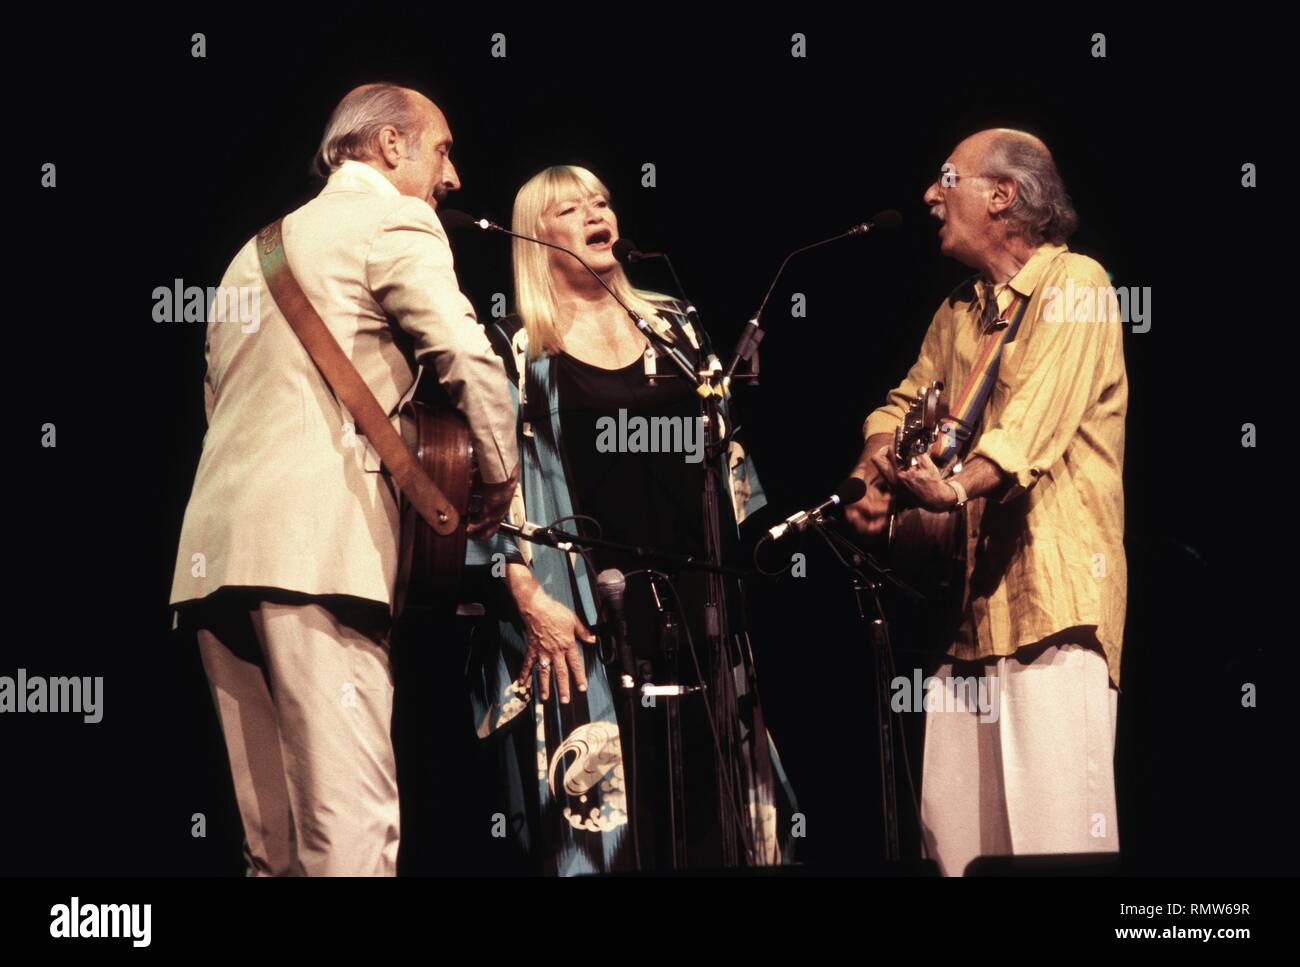 The folk singing trio of Peter, Paul and Mary are shown performing on stage during a 'live' concert appearance. Stock Photo